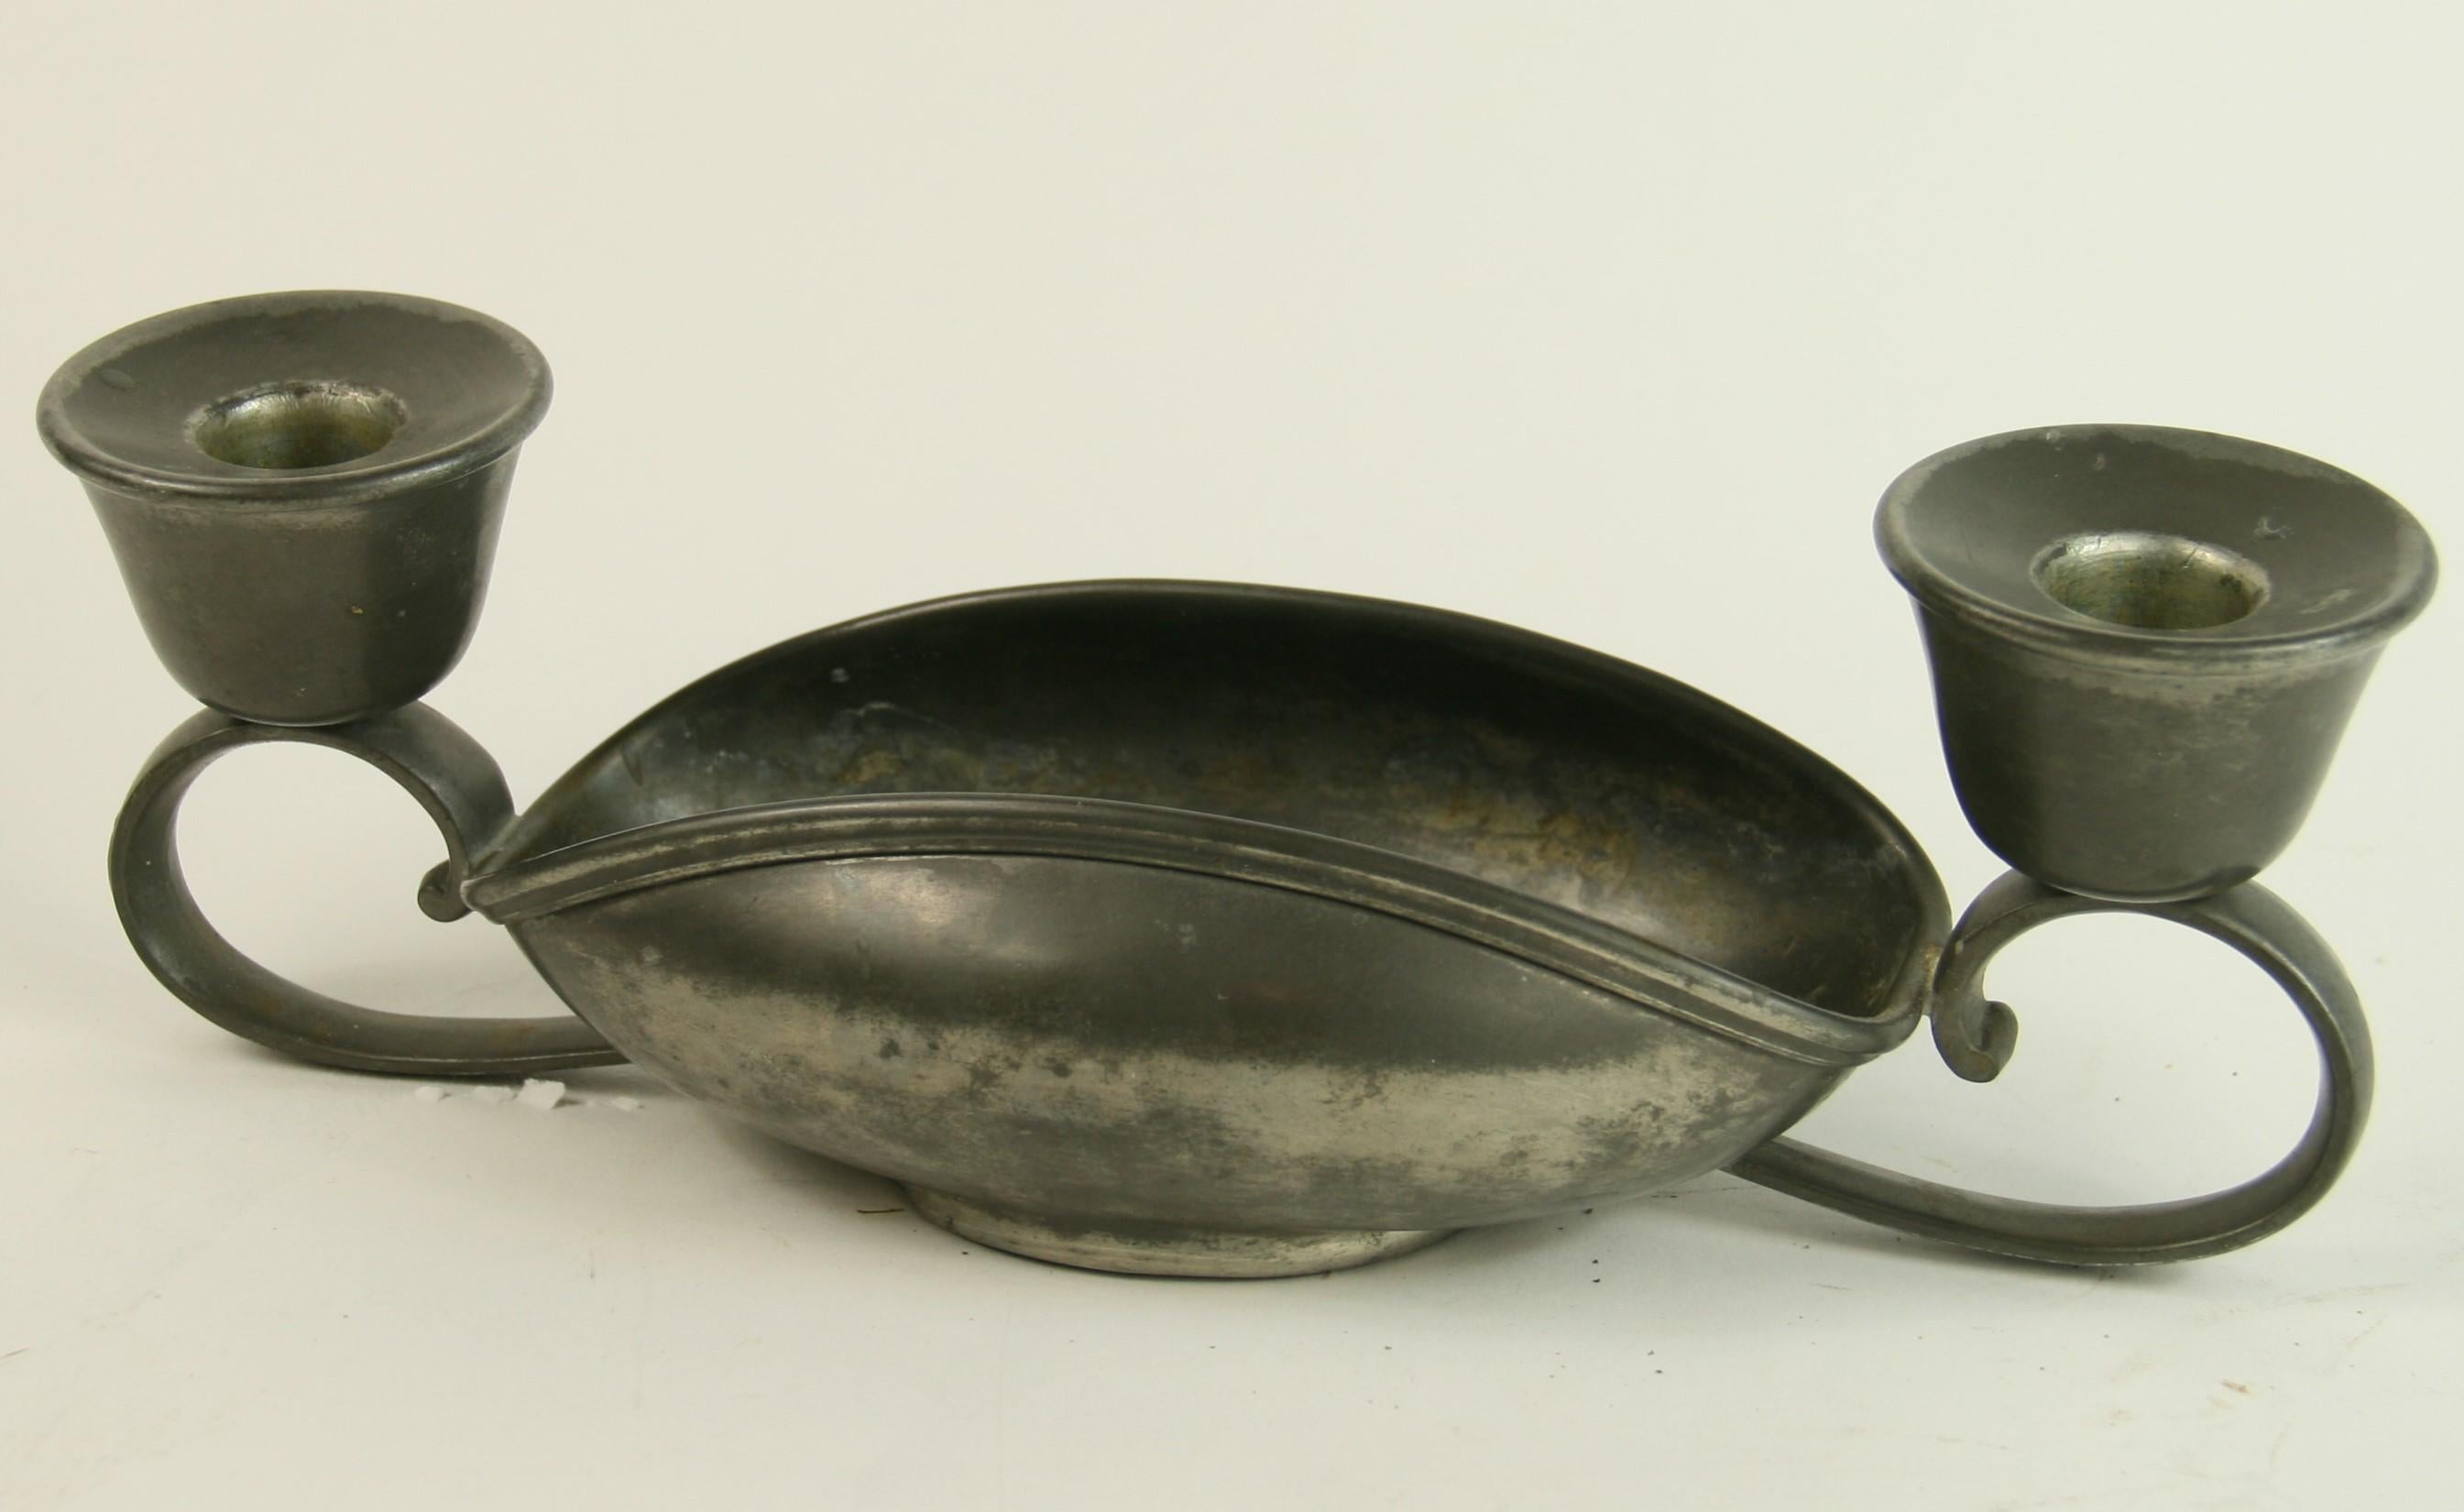 2-283 Pewter candleholder by Rice Pewter, circa 1930s.